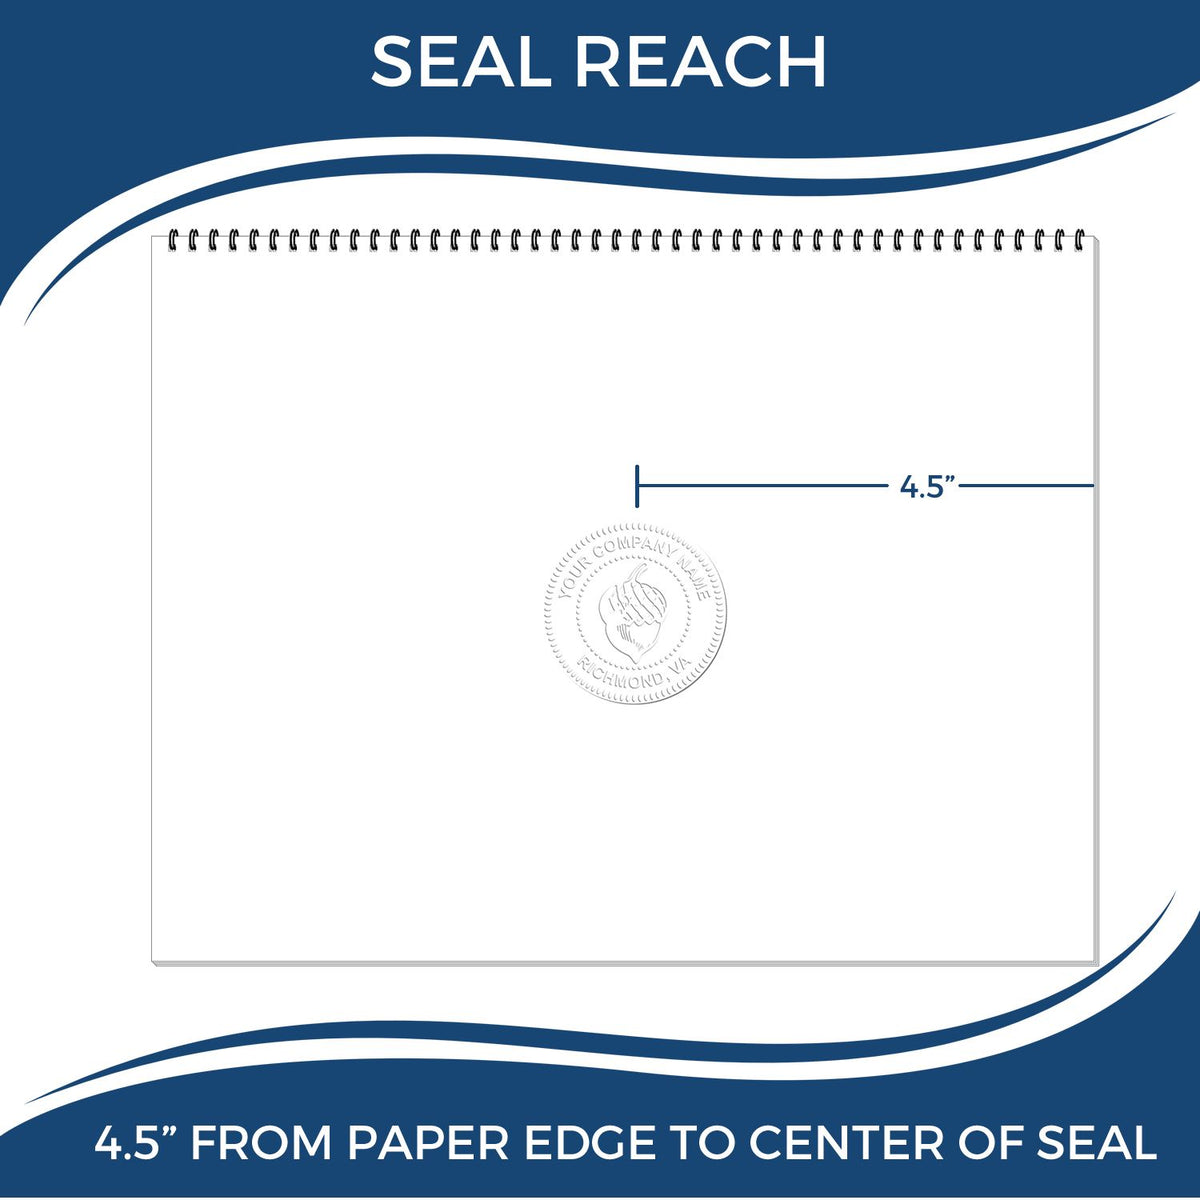 An infographic showing the seal reach which is represented by a ruler and a miniature seal image of the Extended Long Reach North Dakota Architect Seal Embosser